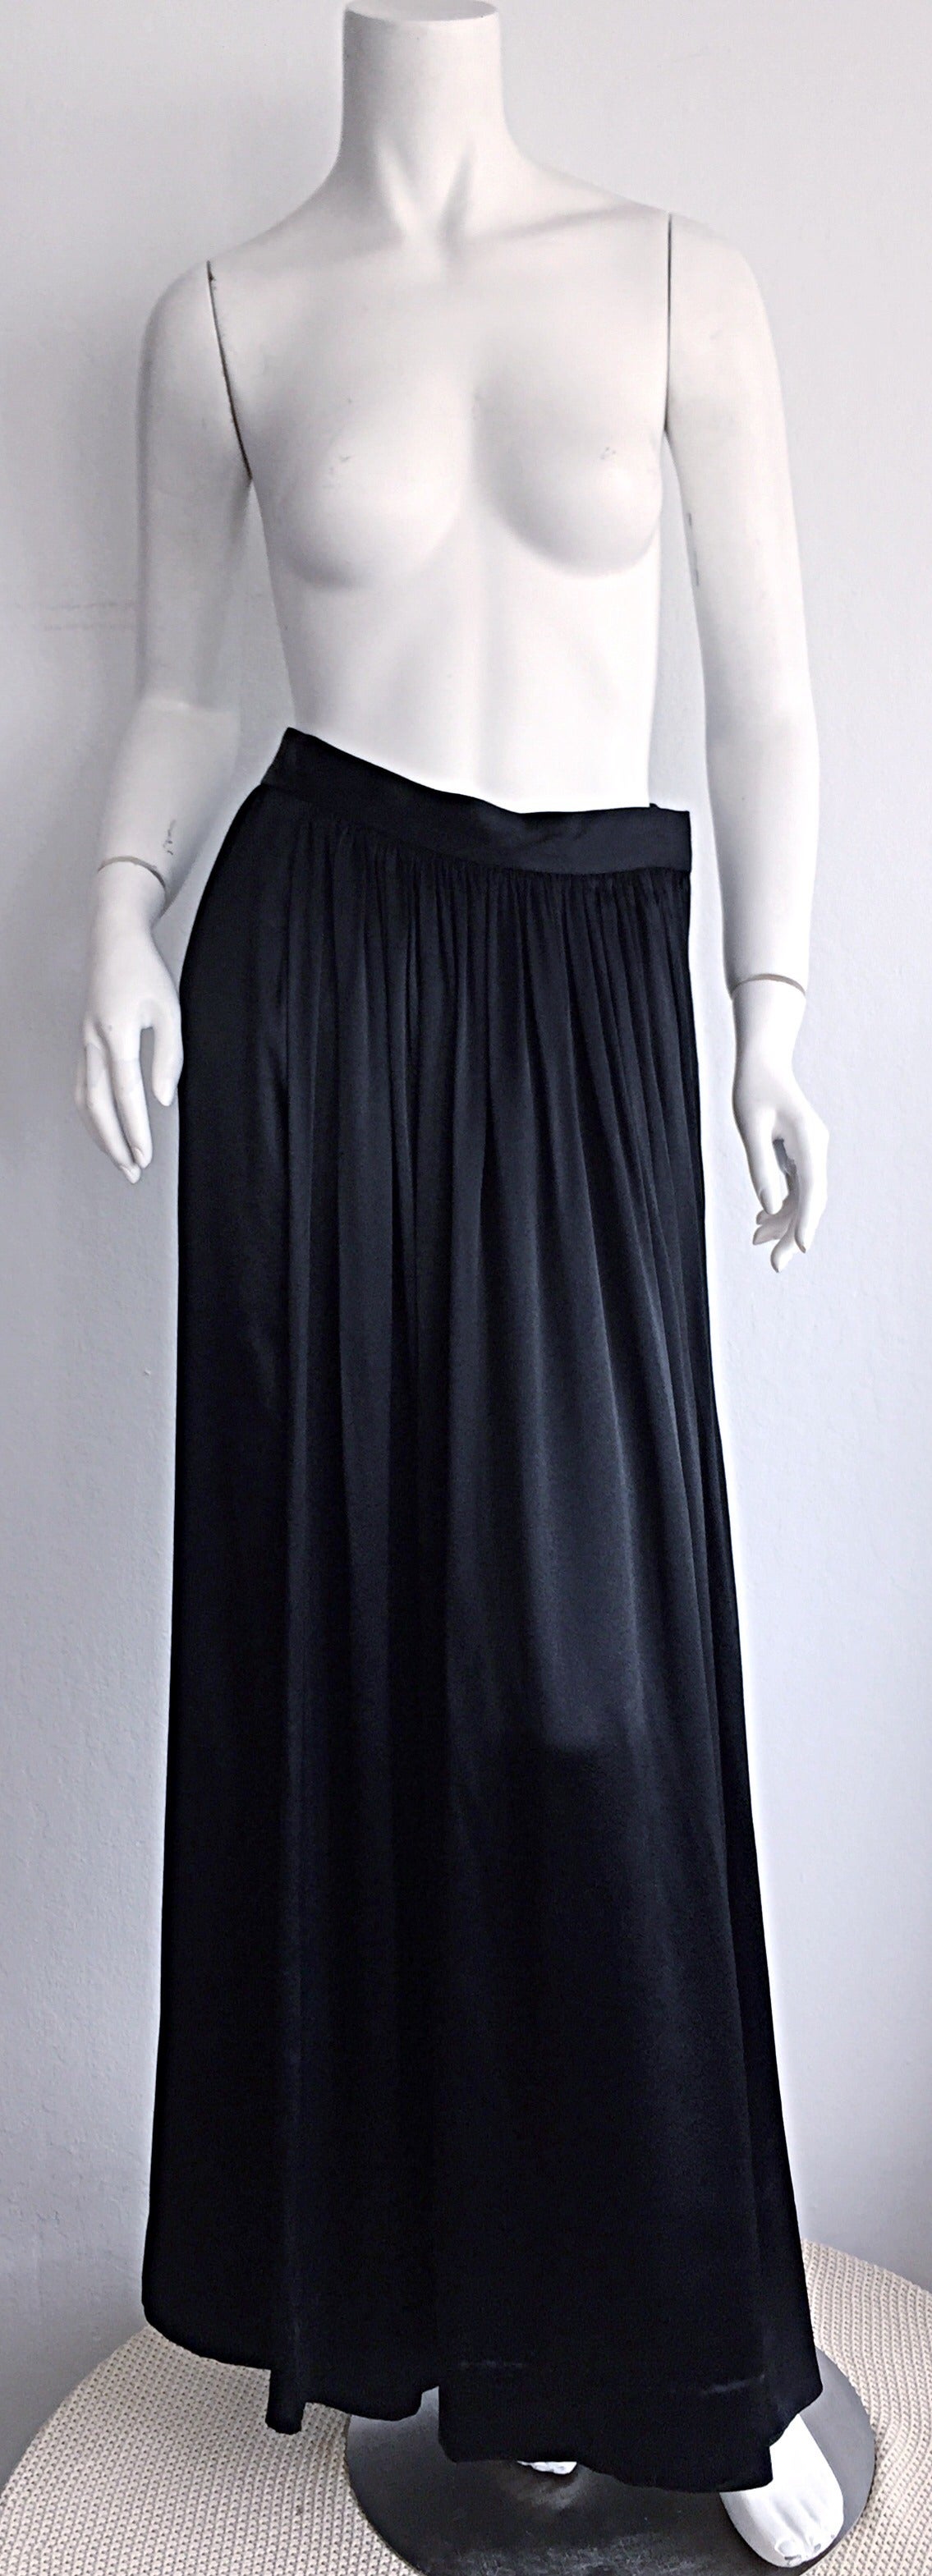 Quite possibly the most amazing vintage late 1970s Yves Saint Laurent YSL skirt that I have ever seen! This chic YSL maxi skirt feels, and looks like liquid silk! Unbelievable movement when worn! Pleats in front, in a mock-wrap style. Extremely